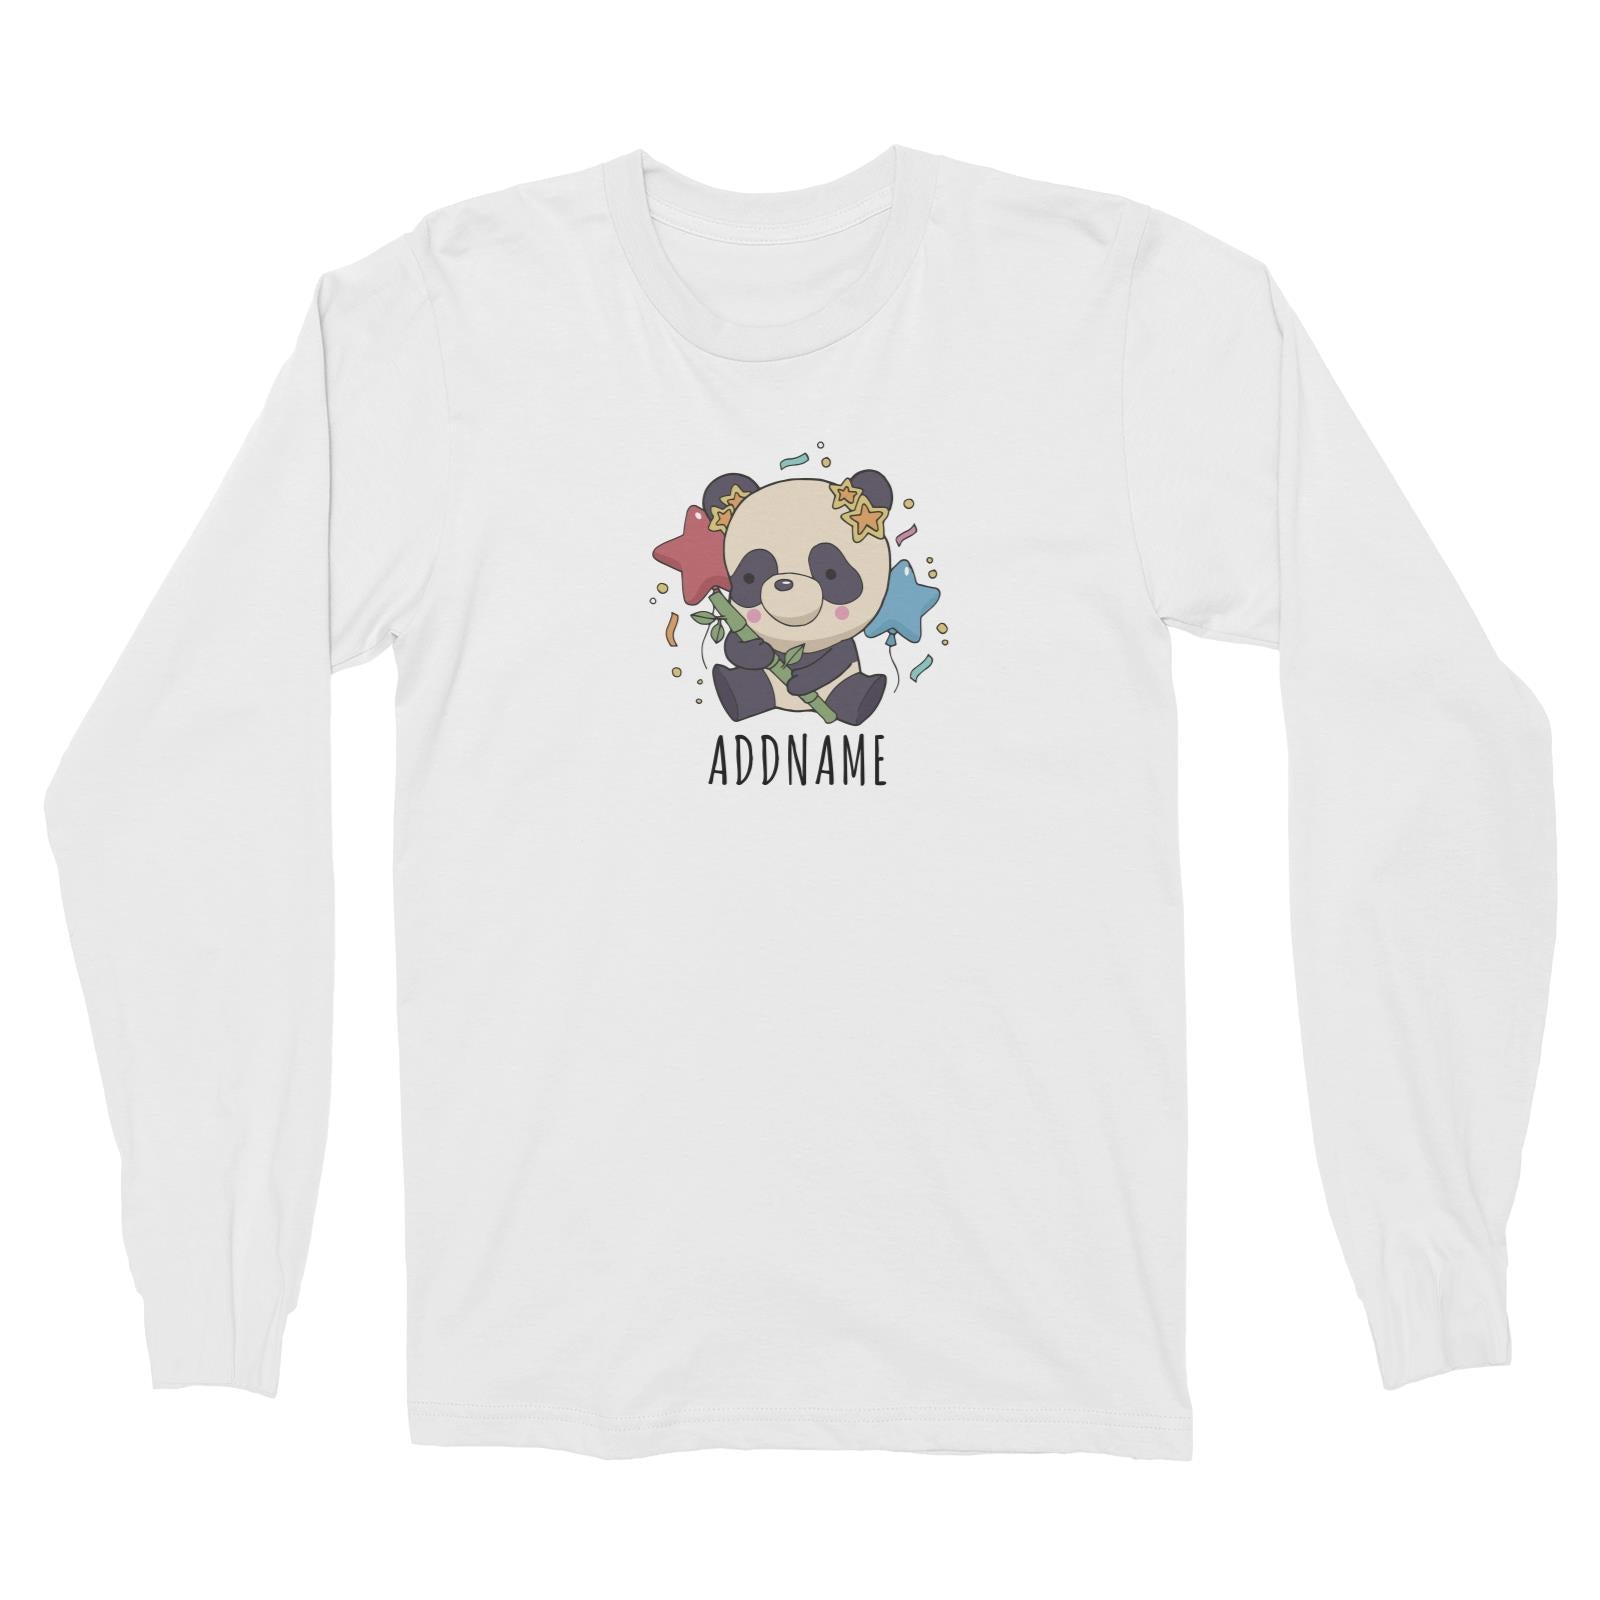 Birthday Sketch Animals Panda with Party Hat Holding Bamboo Addname Long Sleeve Unisex T-Shirt